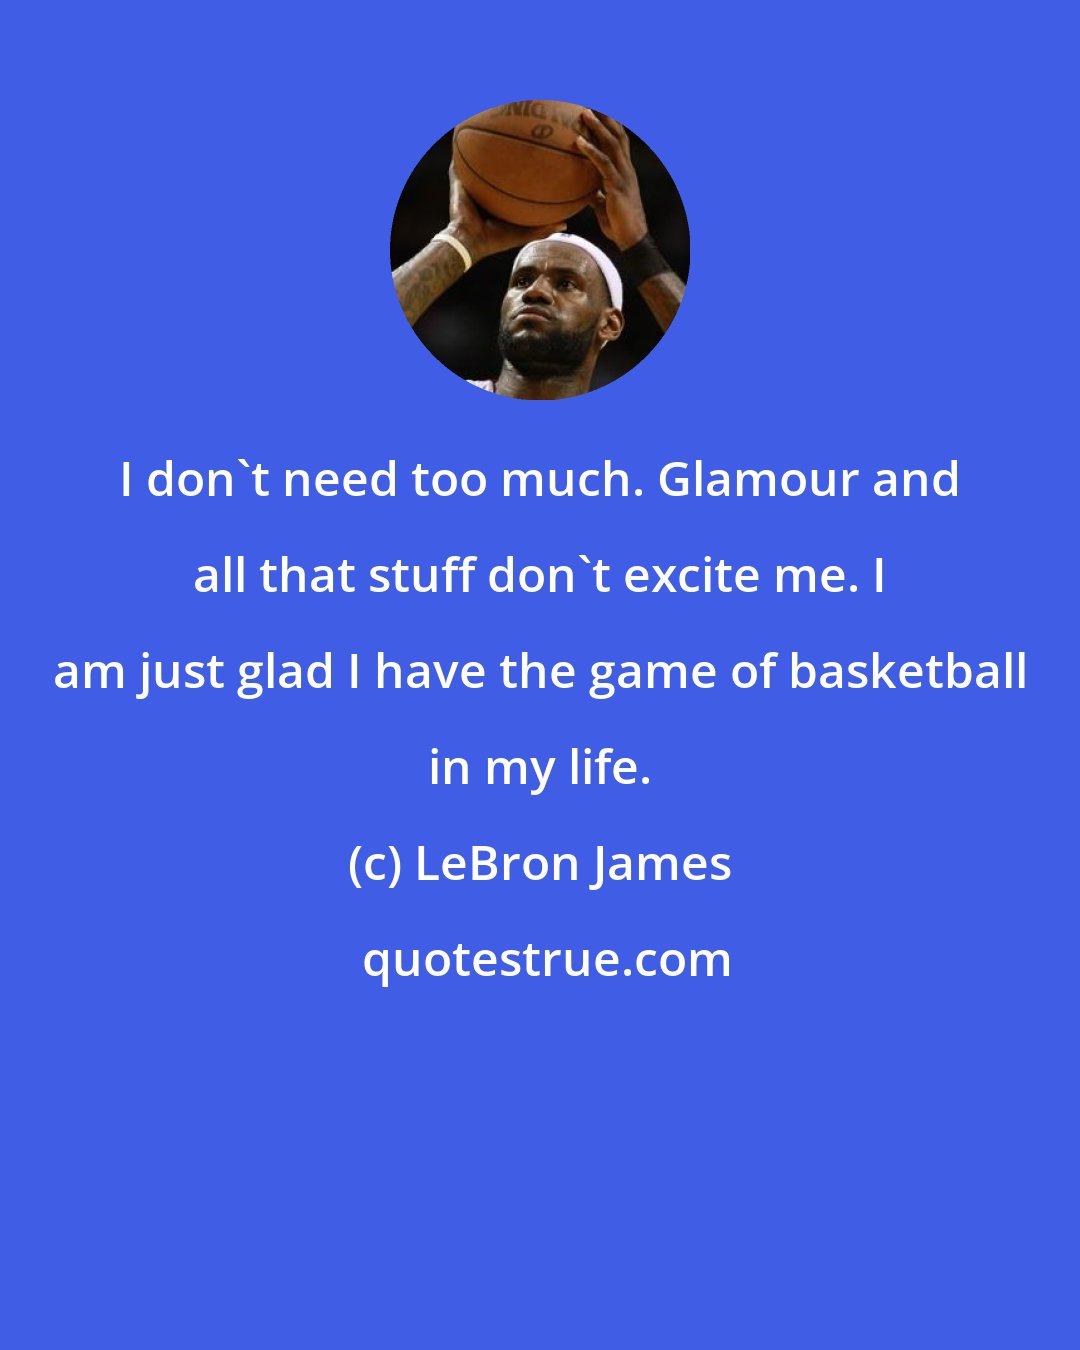 LeBron James: I don't need too much. Glamour and all that stuff don't excite me. I am just glad I have the game of basketball in my life.